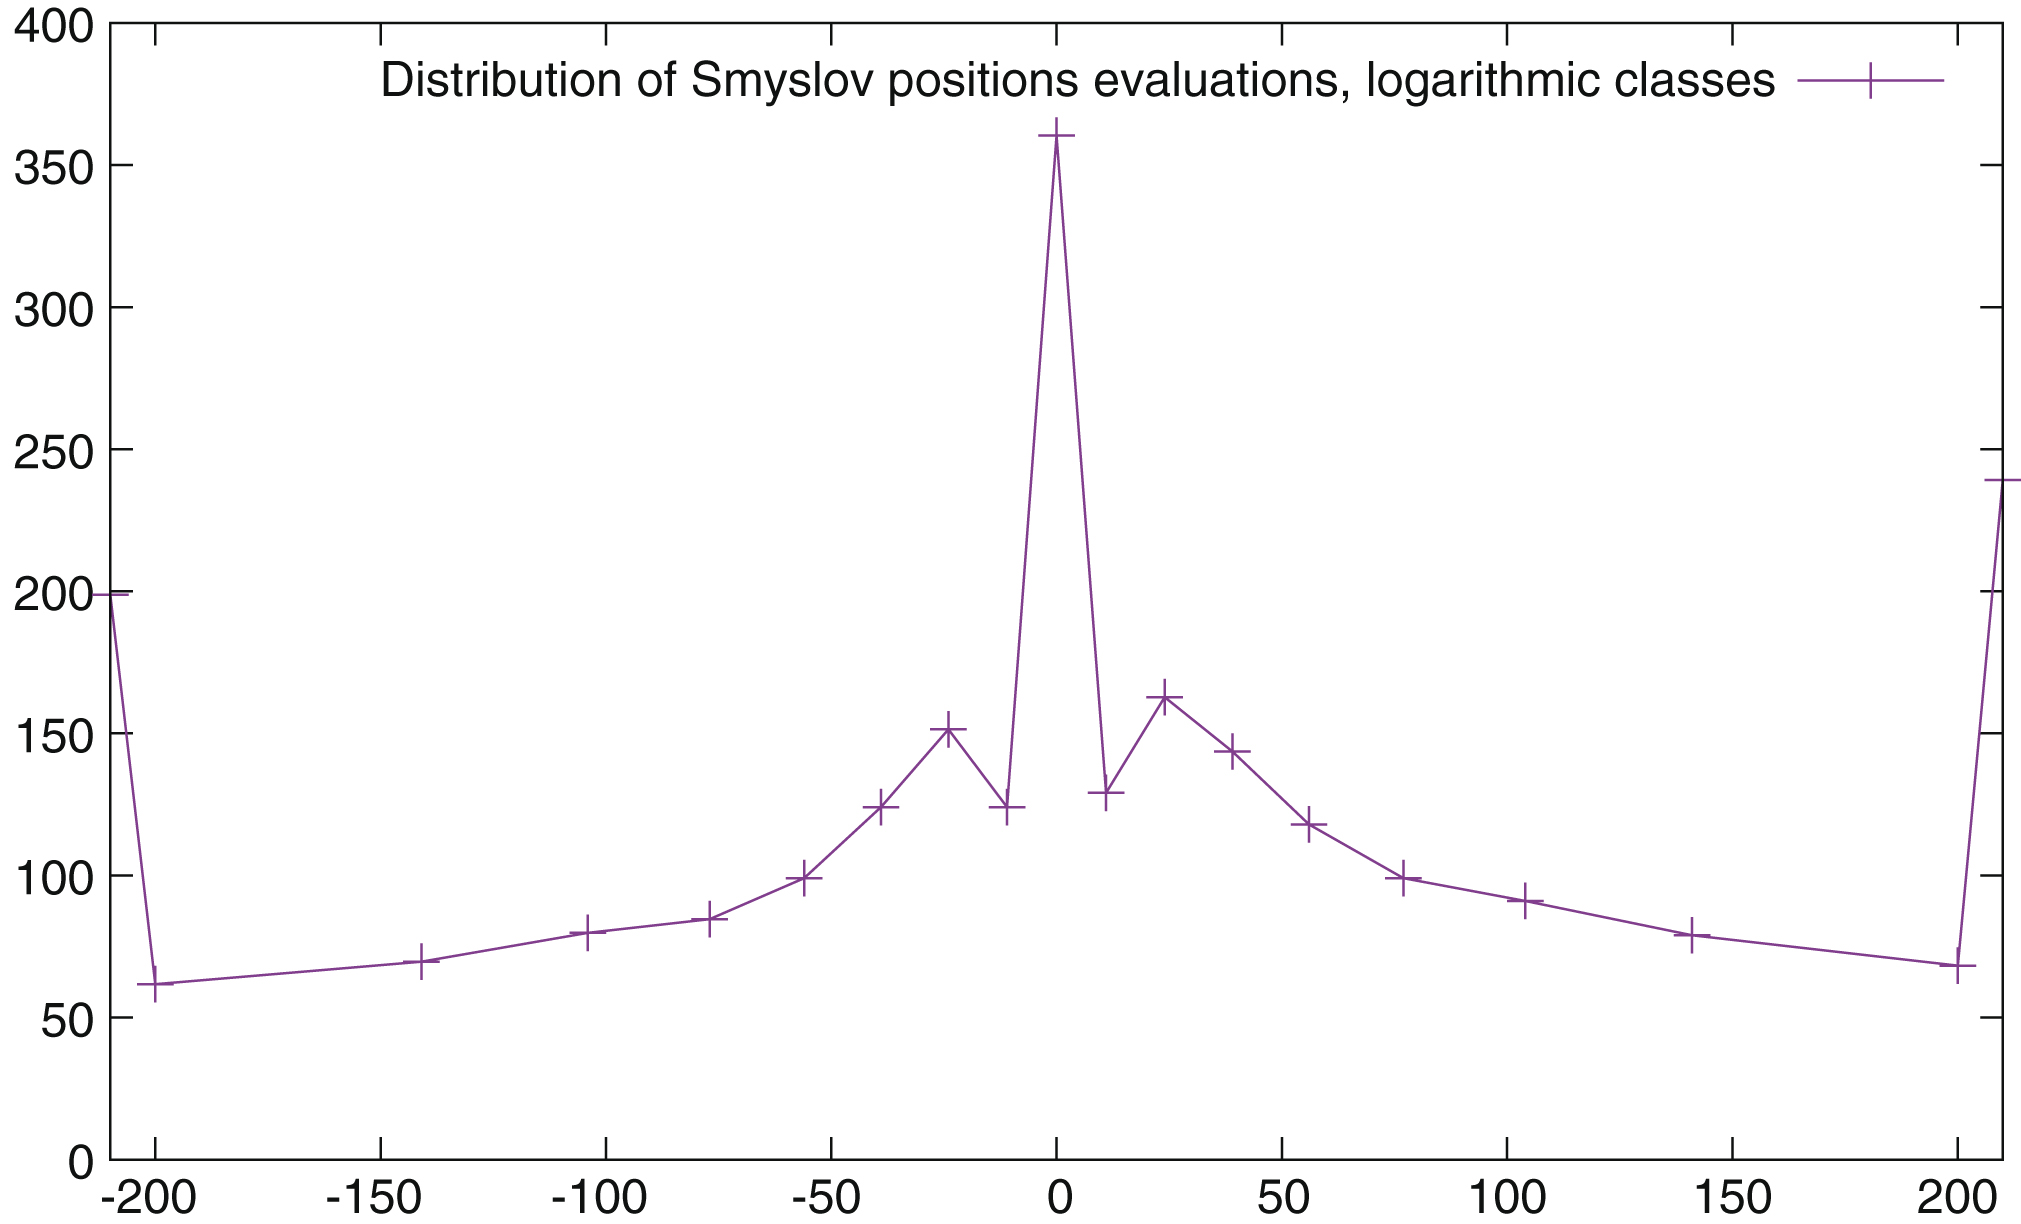 Average number of positions by year as a function of the evaluation of the positions, using logarithmic size classes.